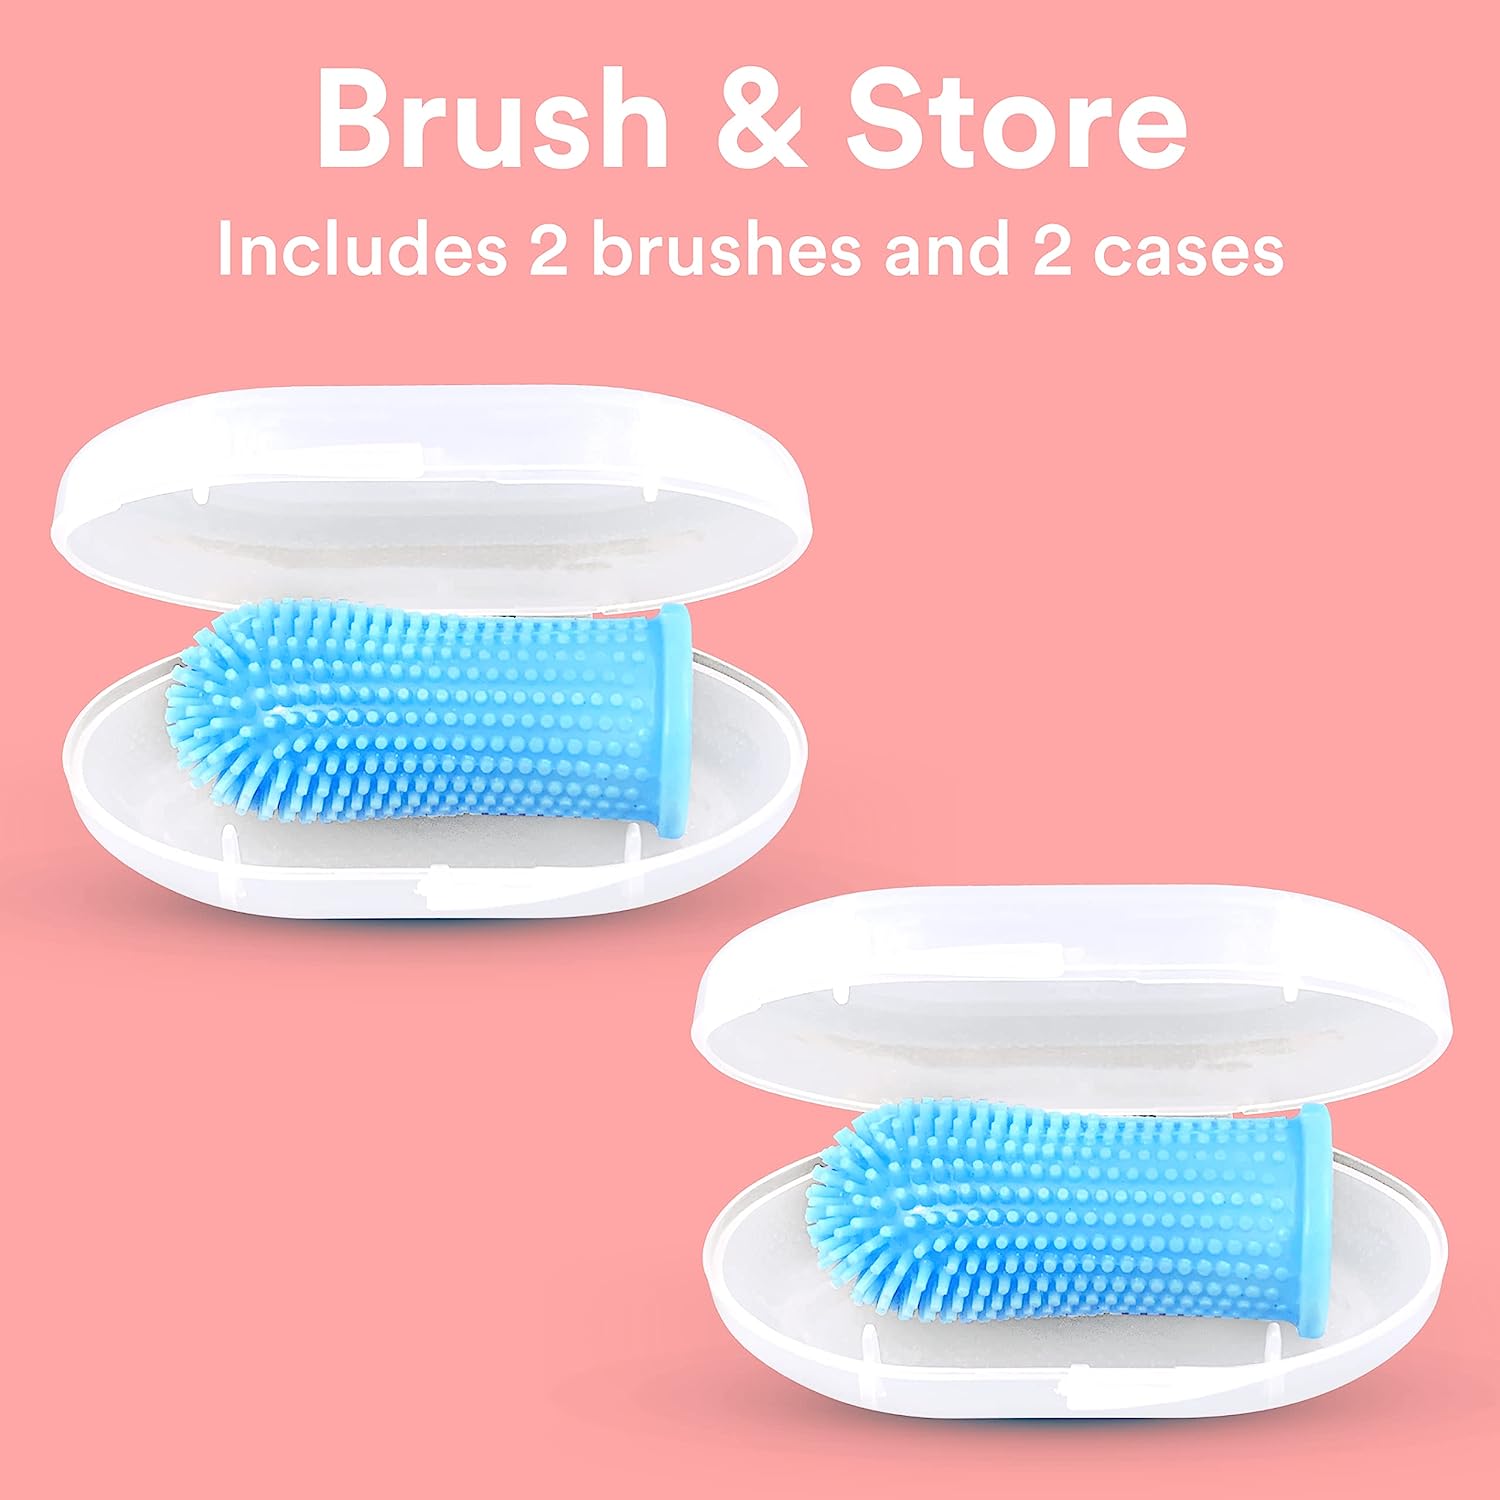 Dog toothbrush-360° dog brushing kit for dog teeth cleaning-dog dental care suitable for puppies, cats and small pets-Ergonomic dog finger toothbrush with surround bristles-blue 4 pieces